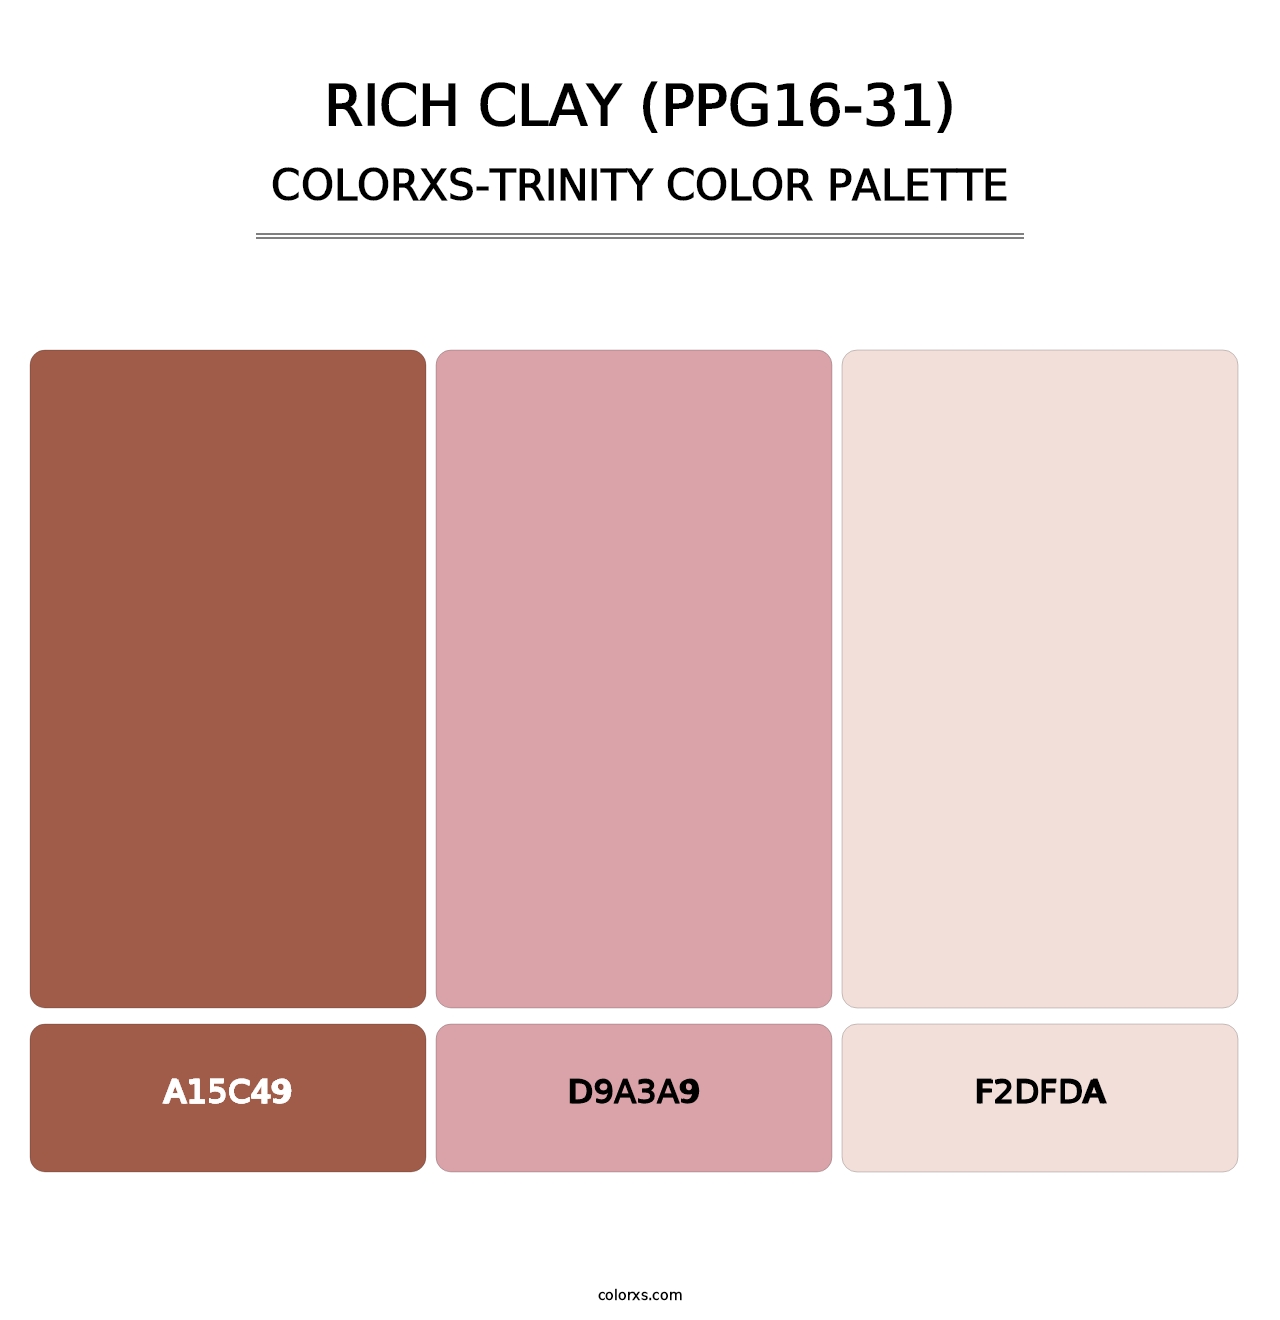 Rich Clay (PPG16-31) - Colorxs Trinity Palette